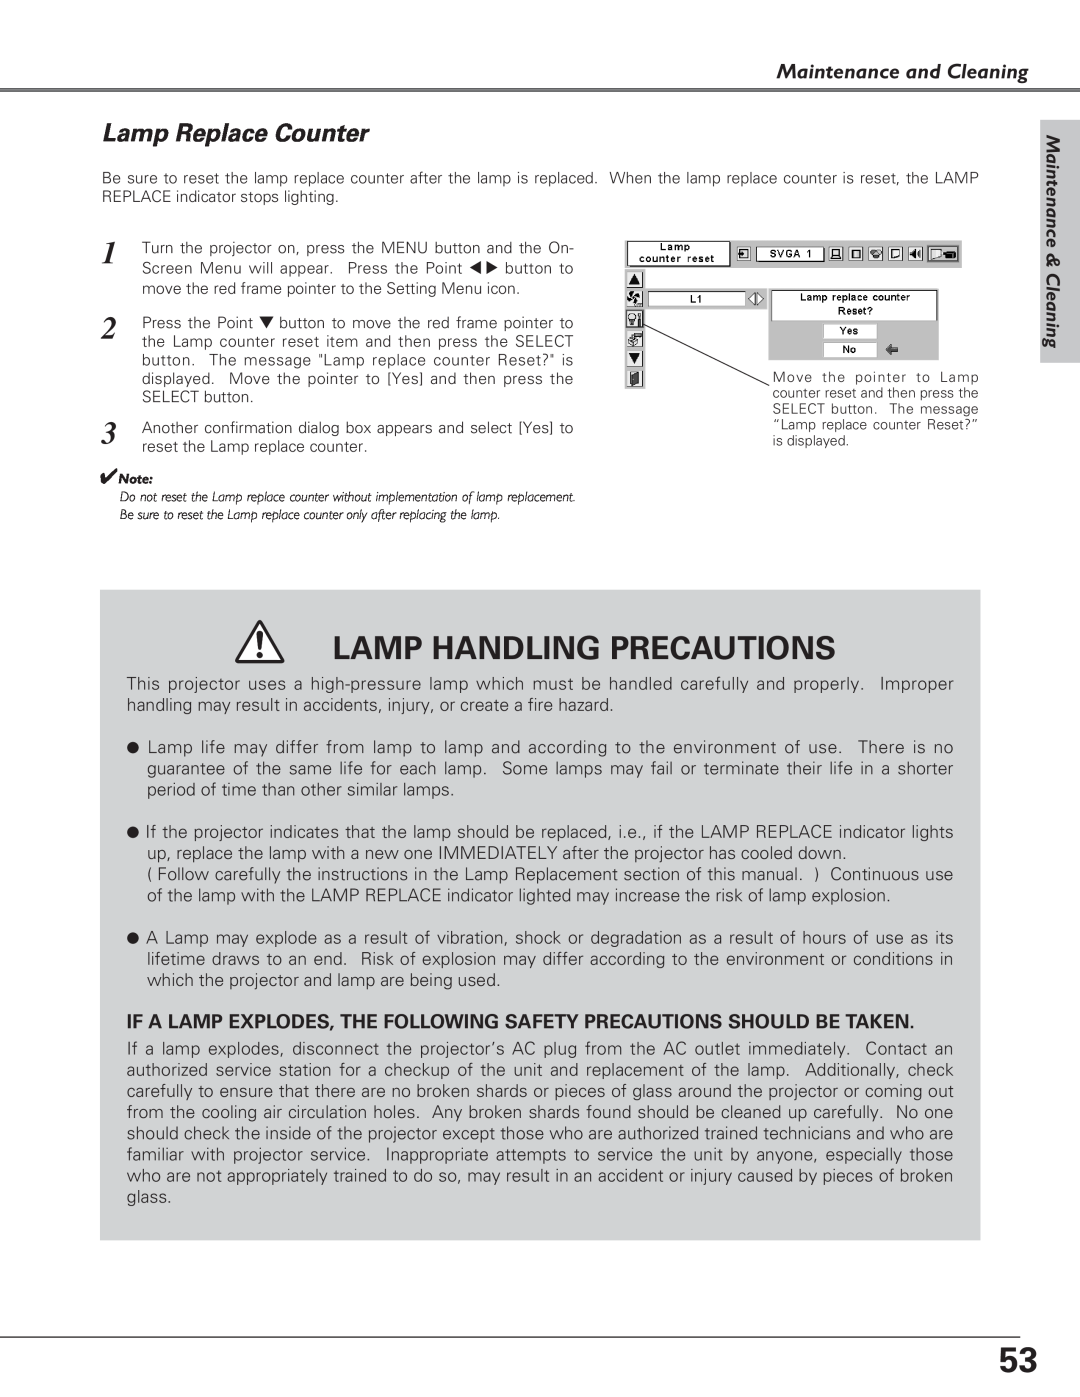 Eiki LC-XB21, LC-XB26 owner manual Lamp Replace Counter, Lamp Handling Precautions, Maintenance and Cleaning 